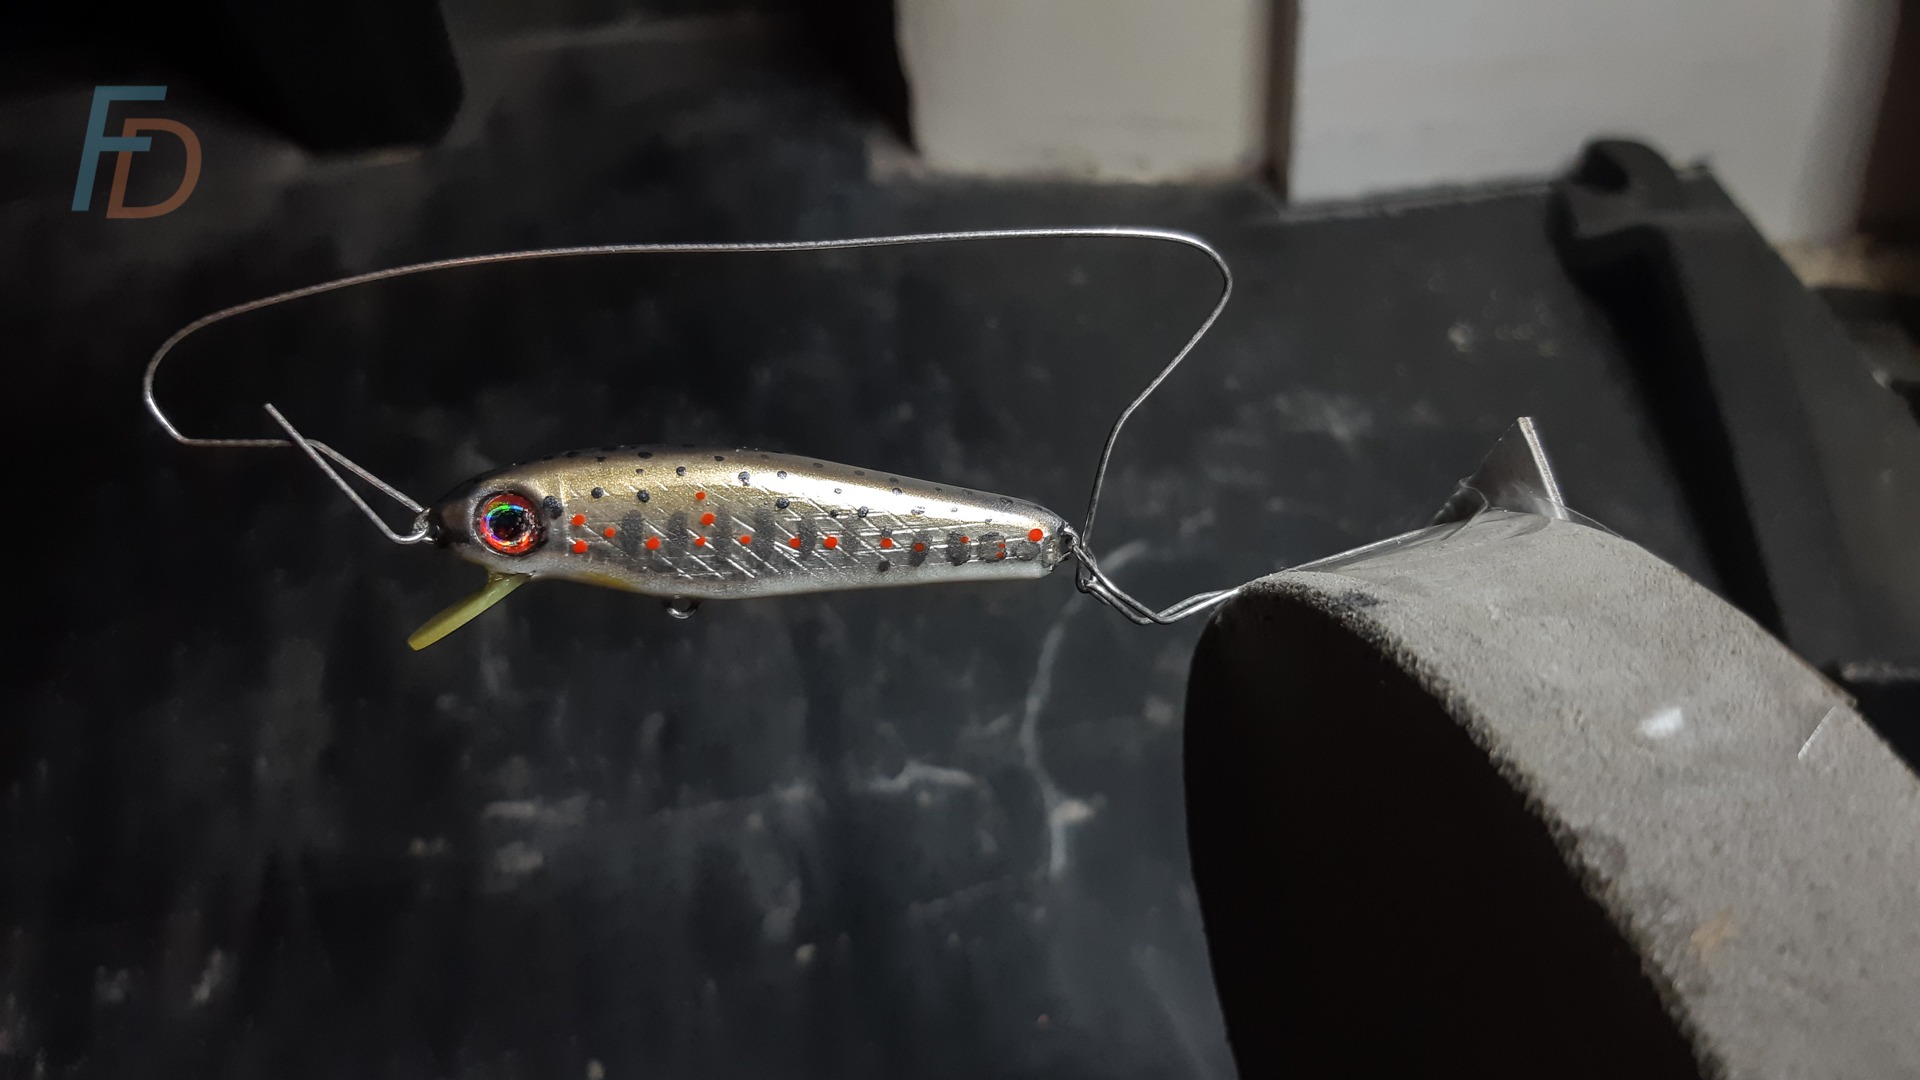 how to make fishing lures: curing topcoat on rotisserie